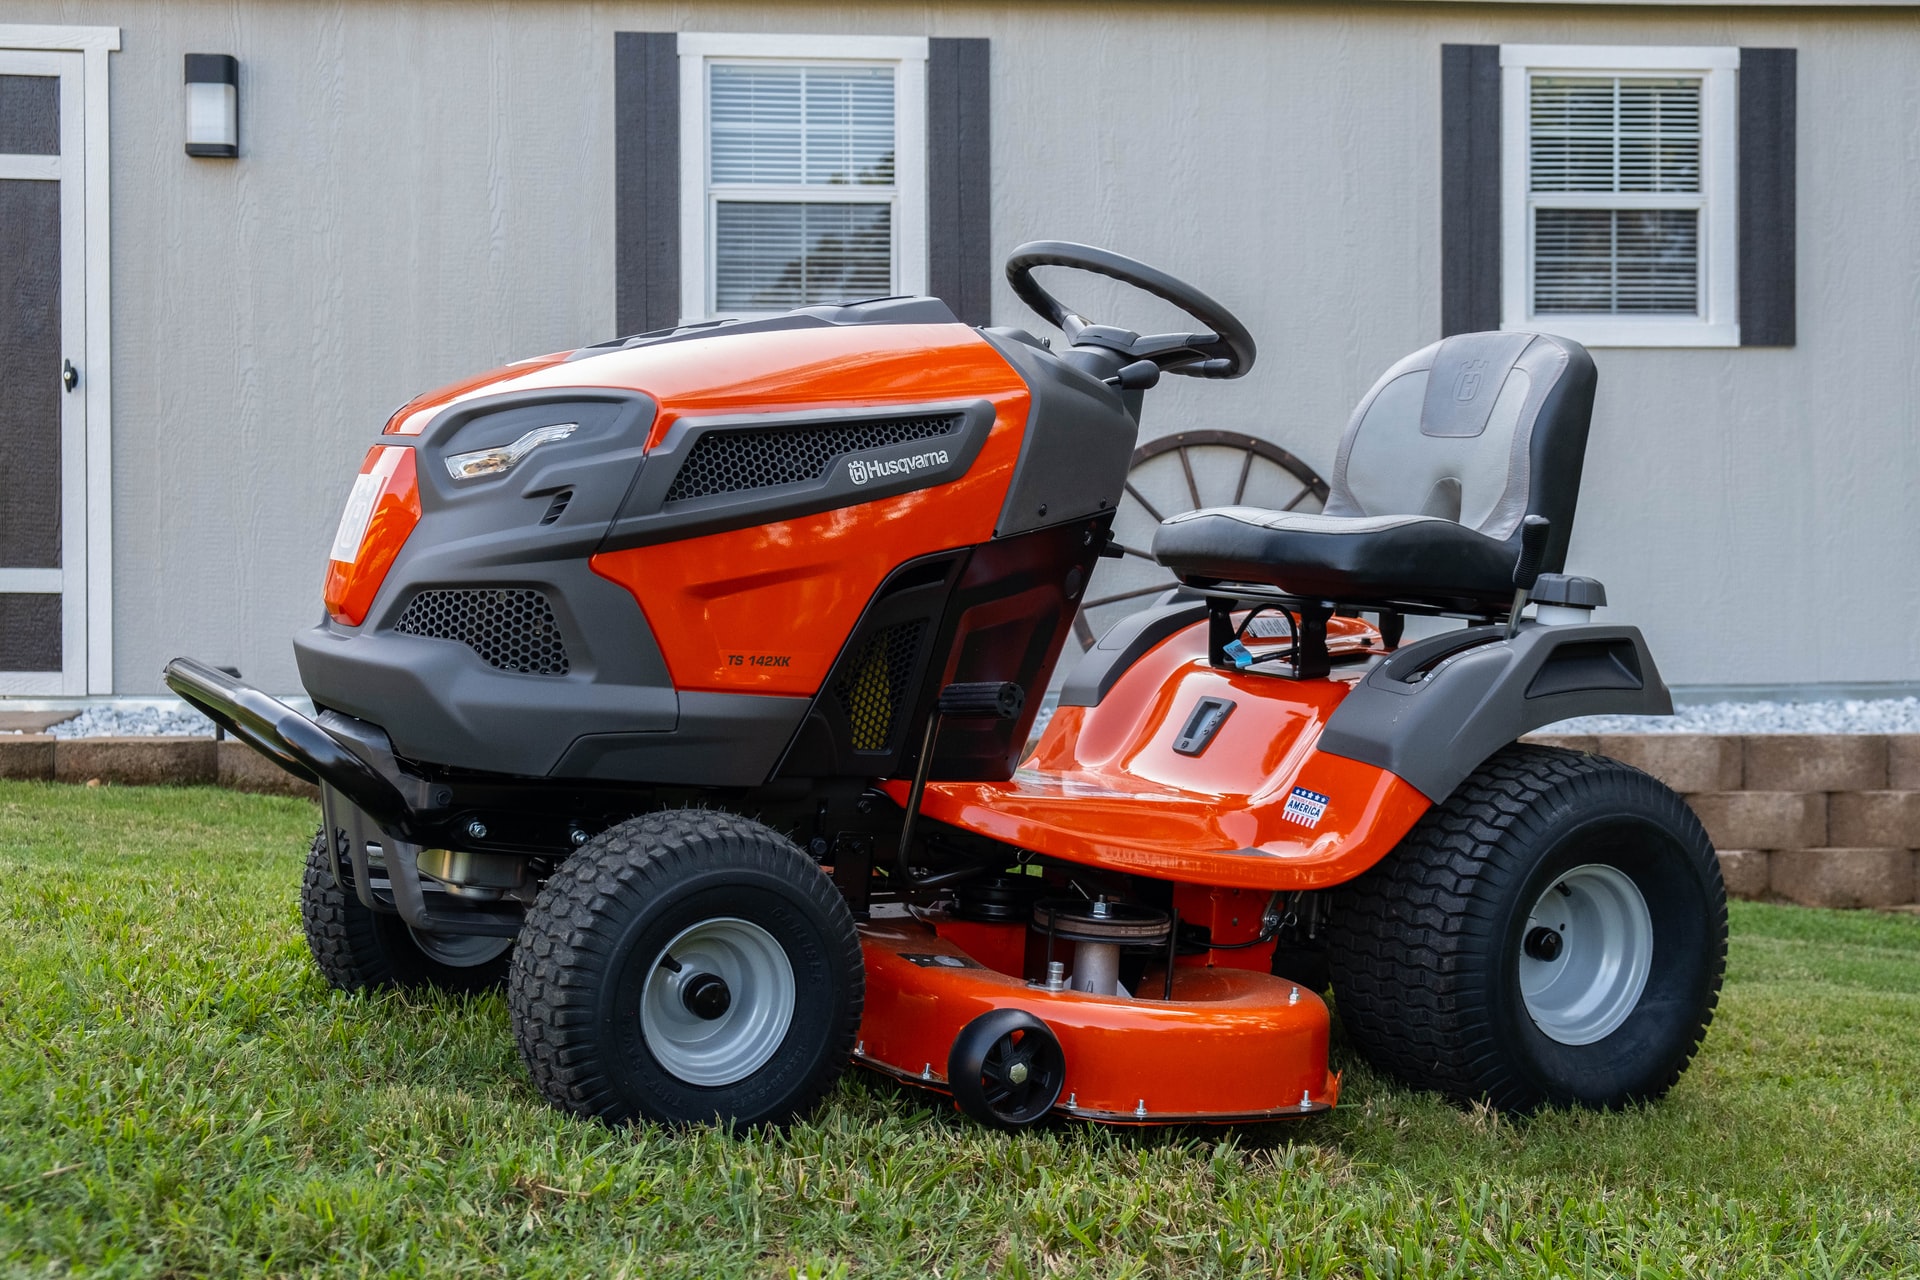 Lawn Mower Towing Capacity: A Complete Guide